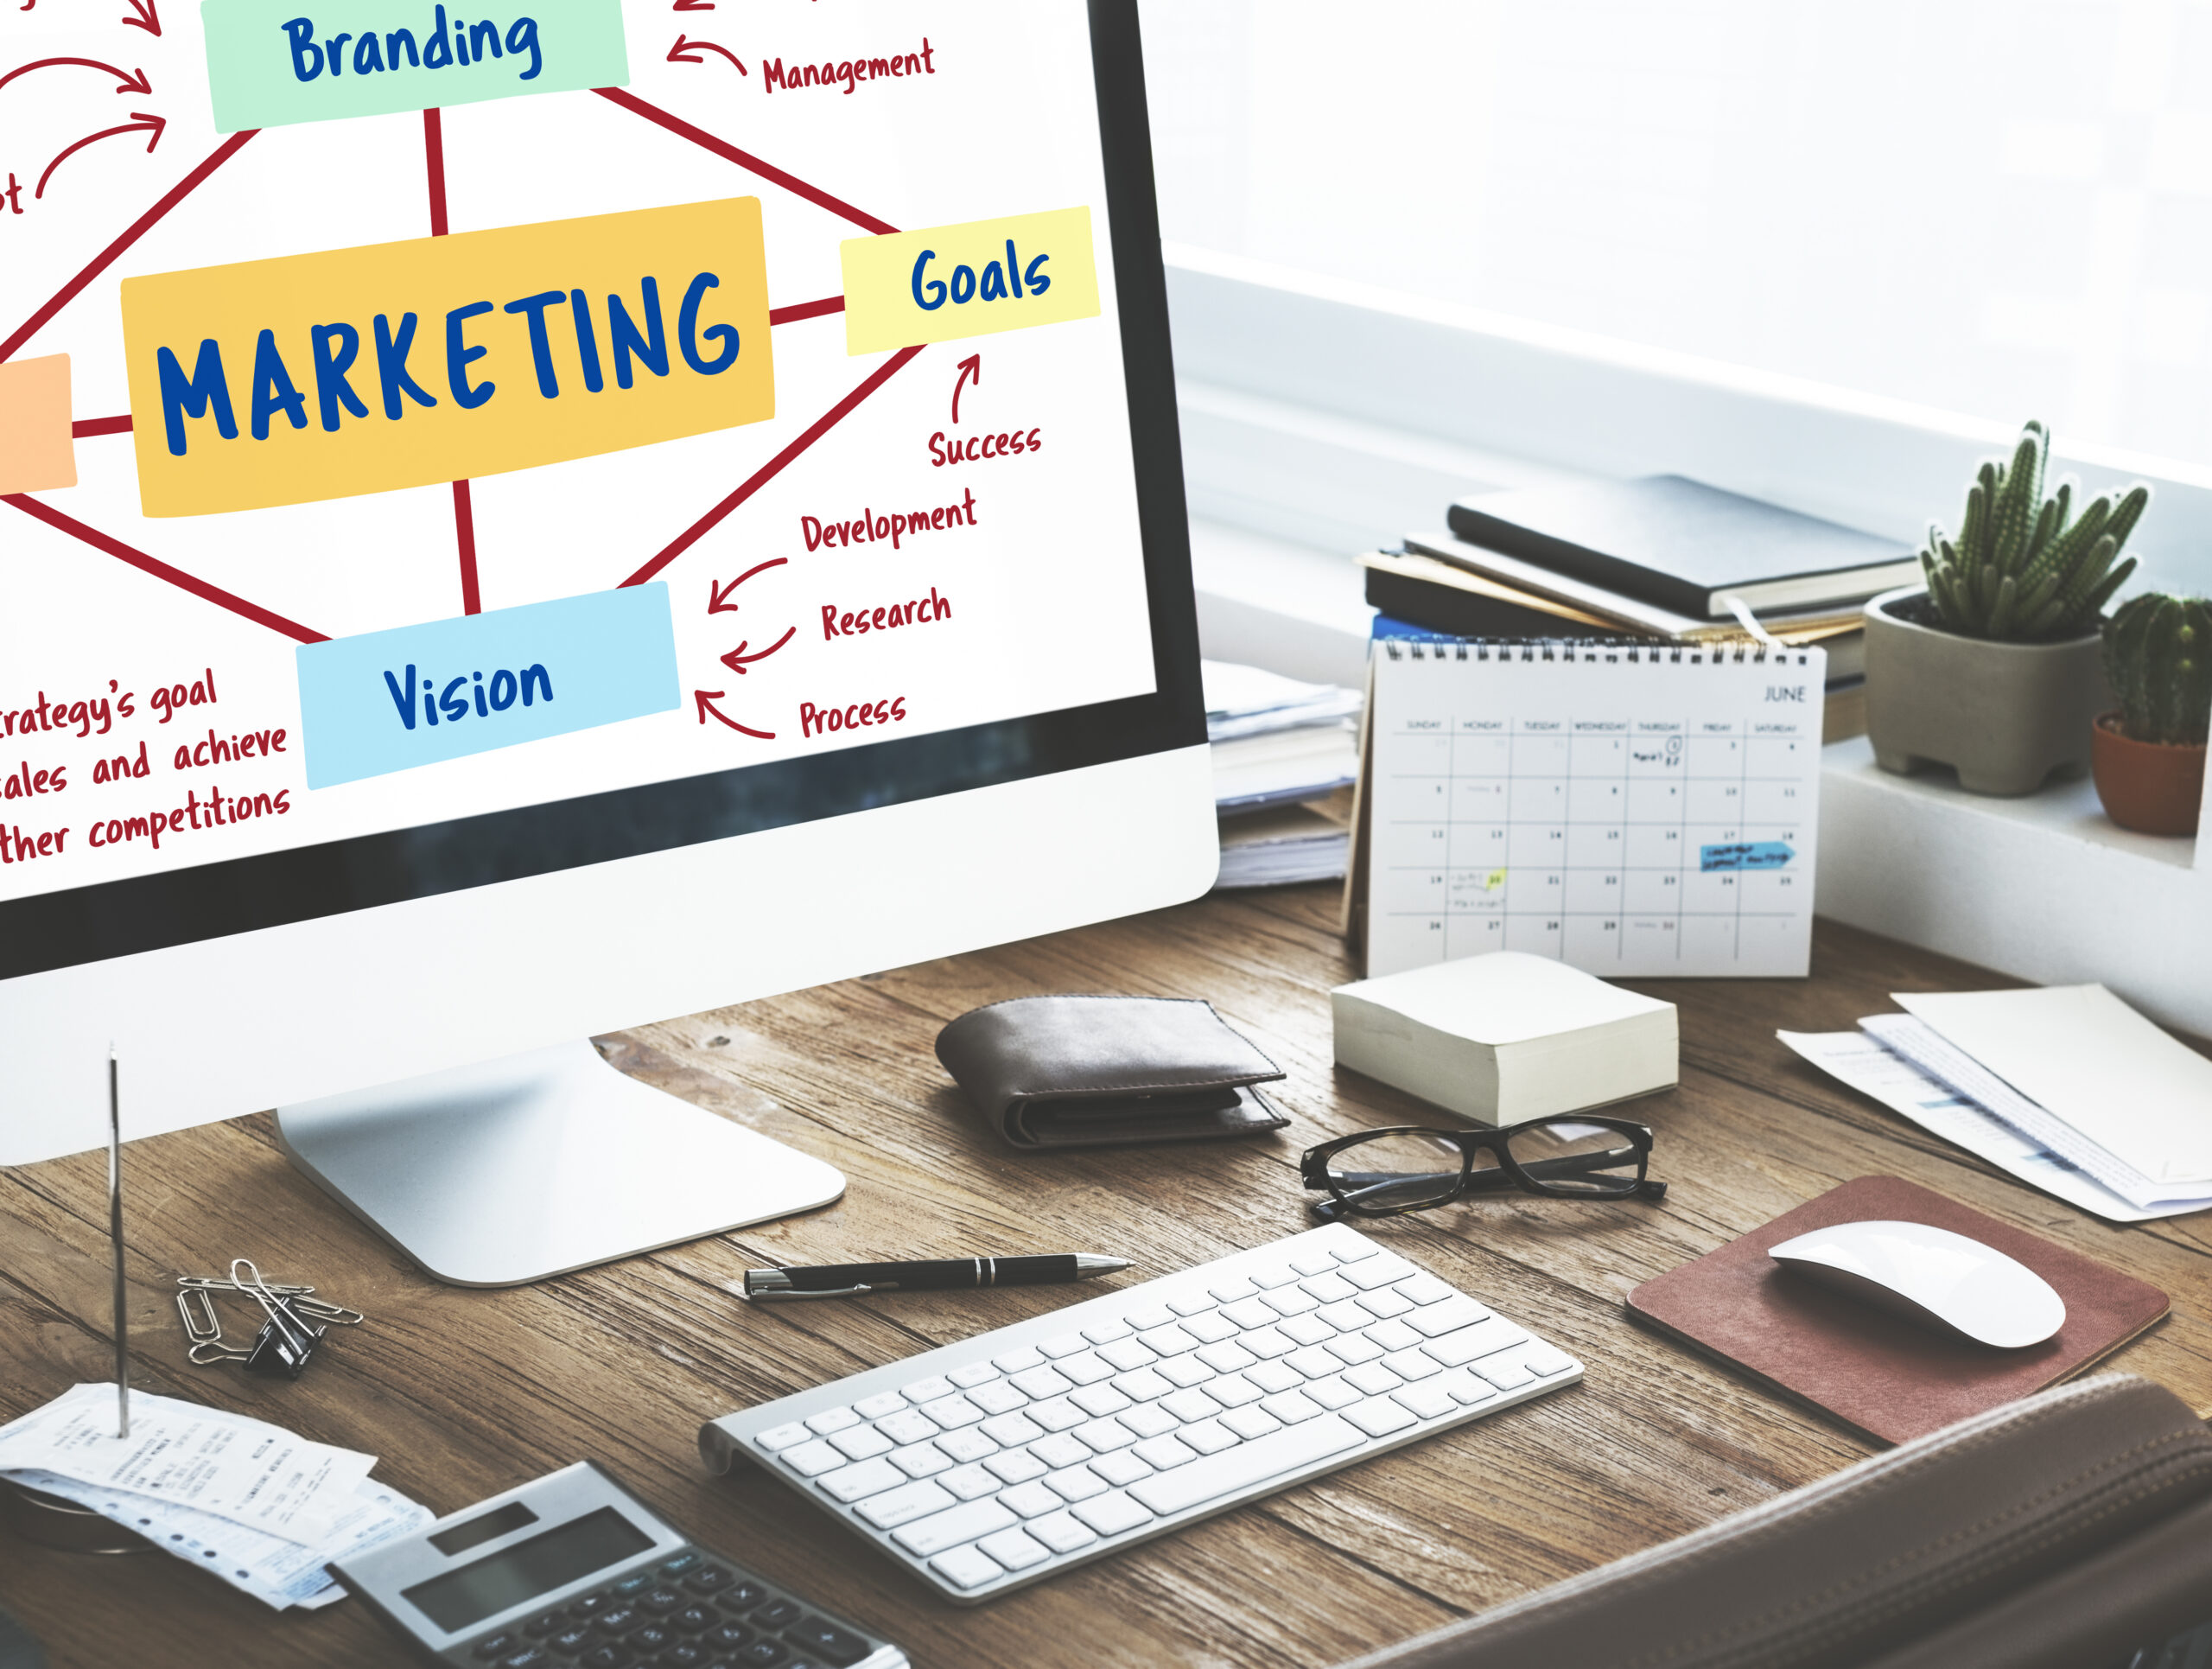             The "Marketing concept" proposes that to complete its organizational objectives, an organization should anticipate the needs and wants of potential consumers and satisfy them more effectively than its competitors.